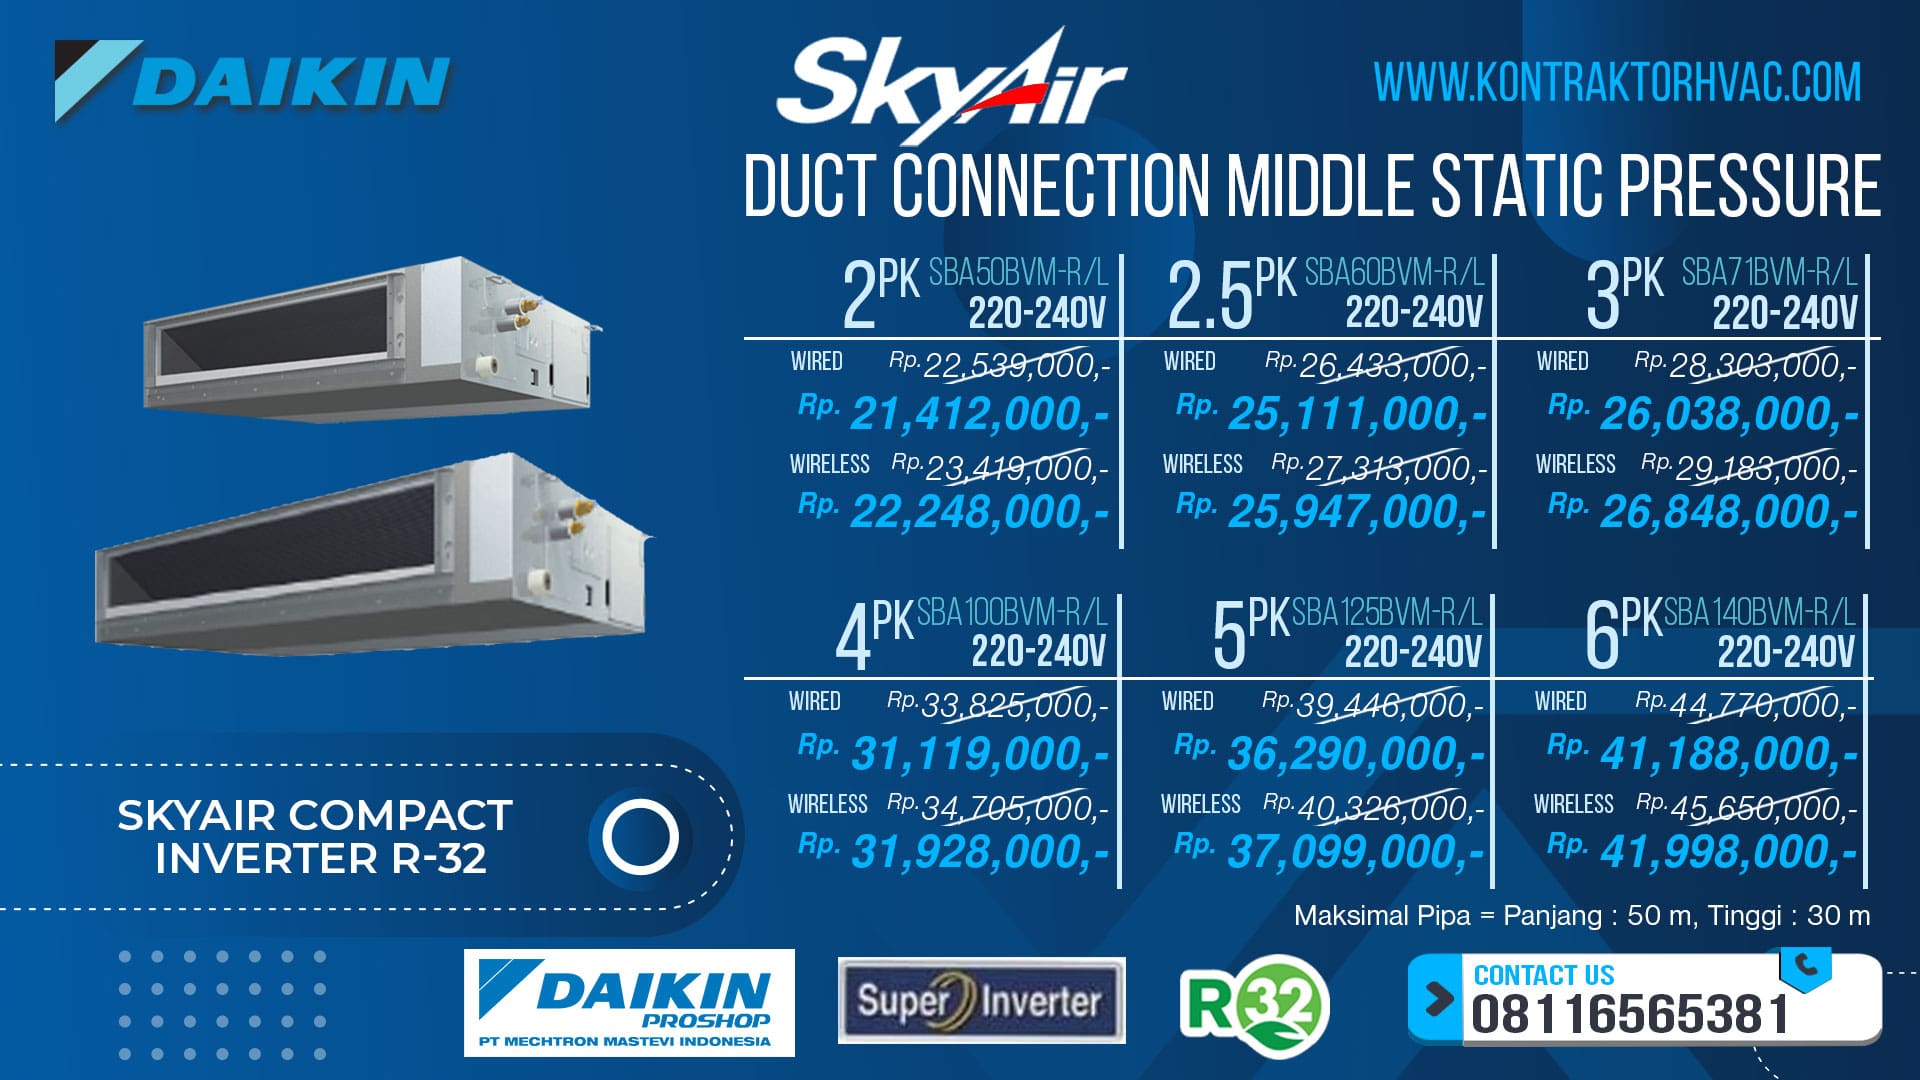 1.SKYAIR-Compact-Inverter-R-32-Duct-Connection-Middle-Static-Pressure-min